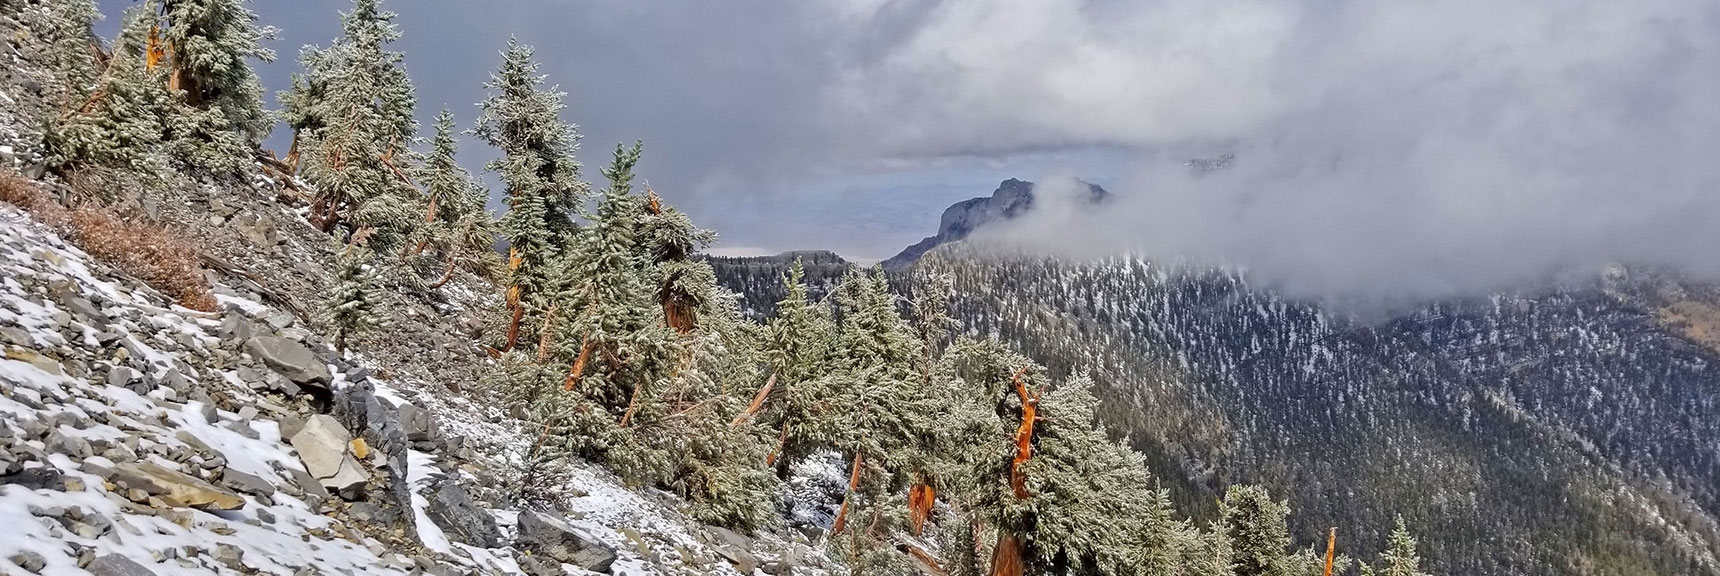 View Toward Mummy's Head Totally Obscured by Clouds | Charleston Peak Loop October Snow Dusting | Mt. Charleston Wilderness | Spring Mountains, Nevada